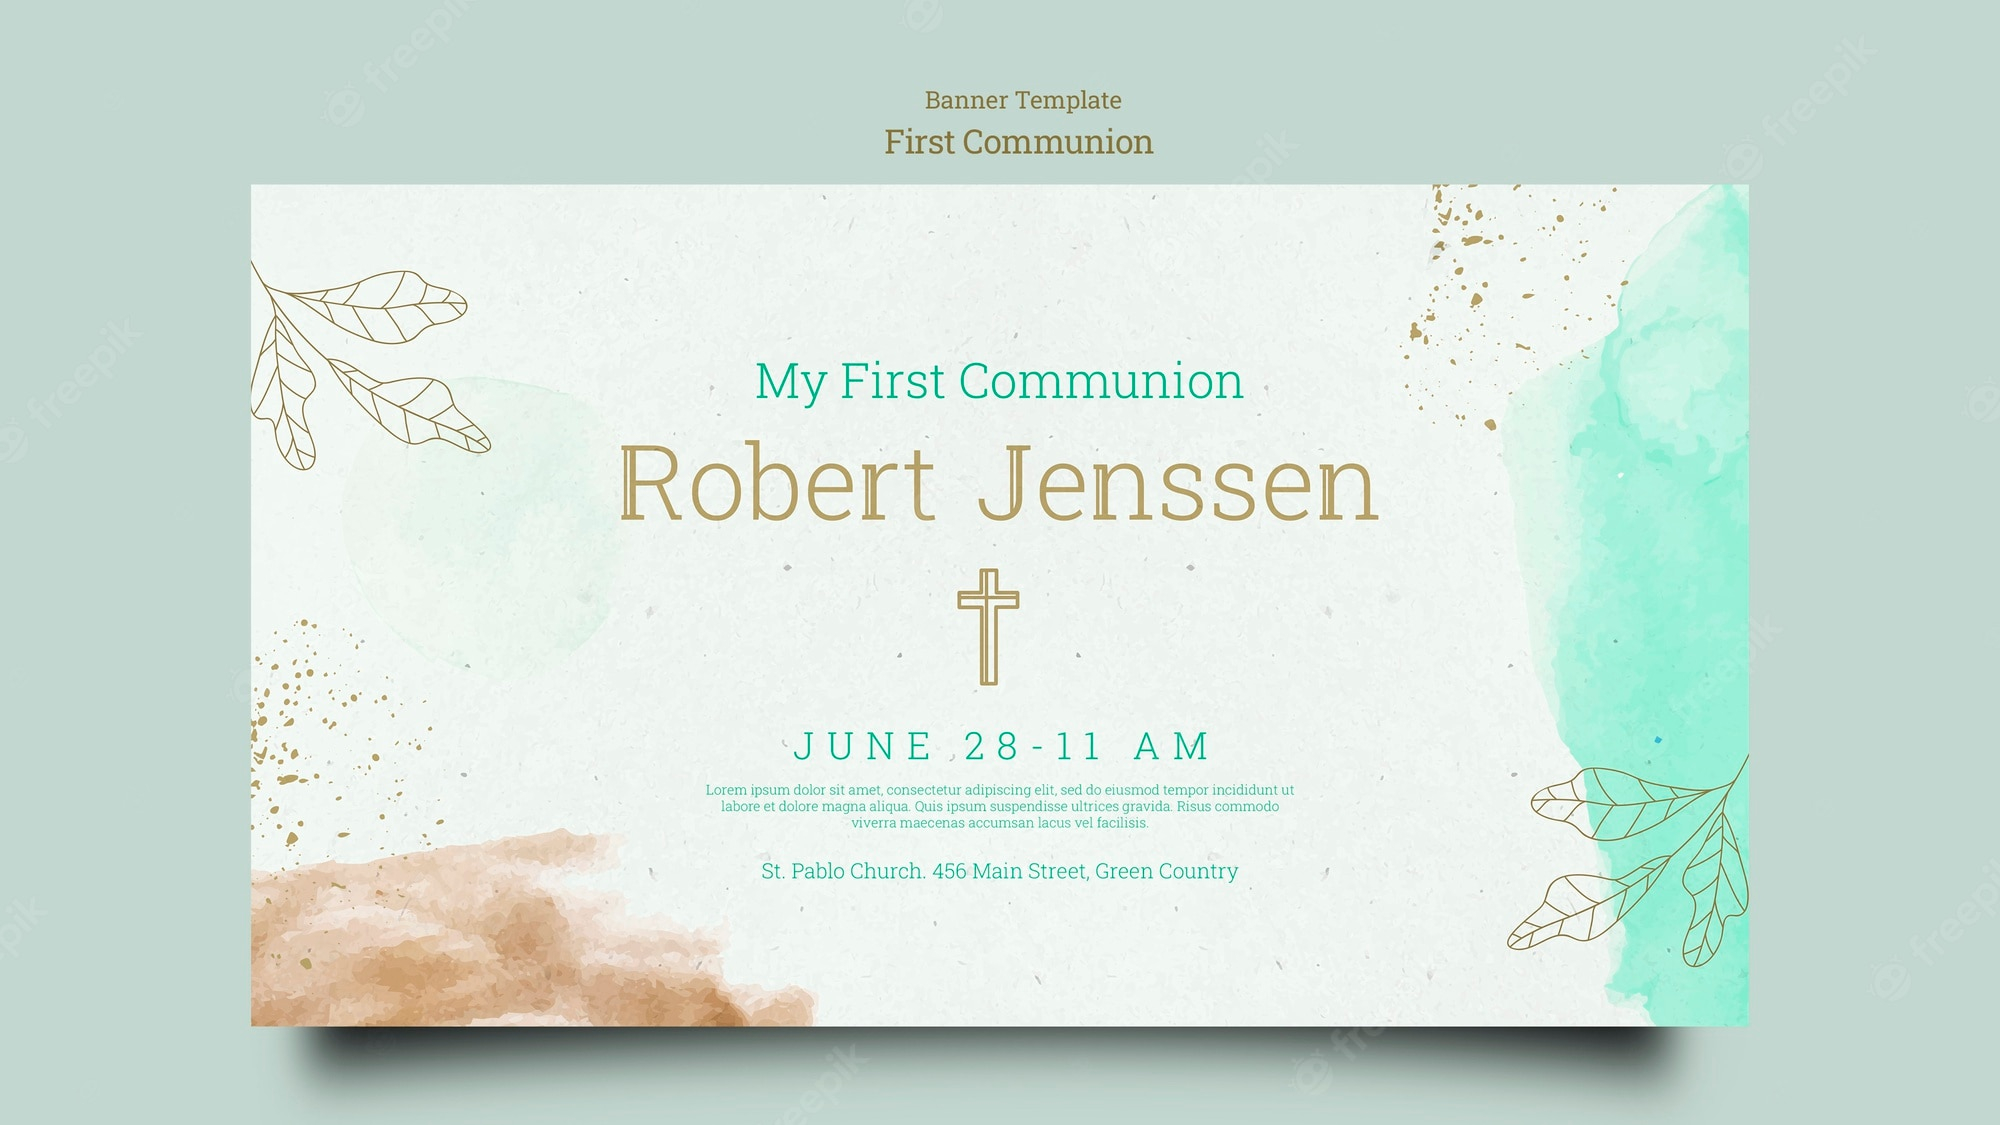 Free PSD  First Communion Banner Template Throughout First Communion Banner Templates